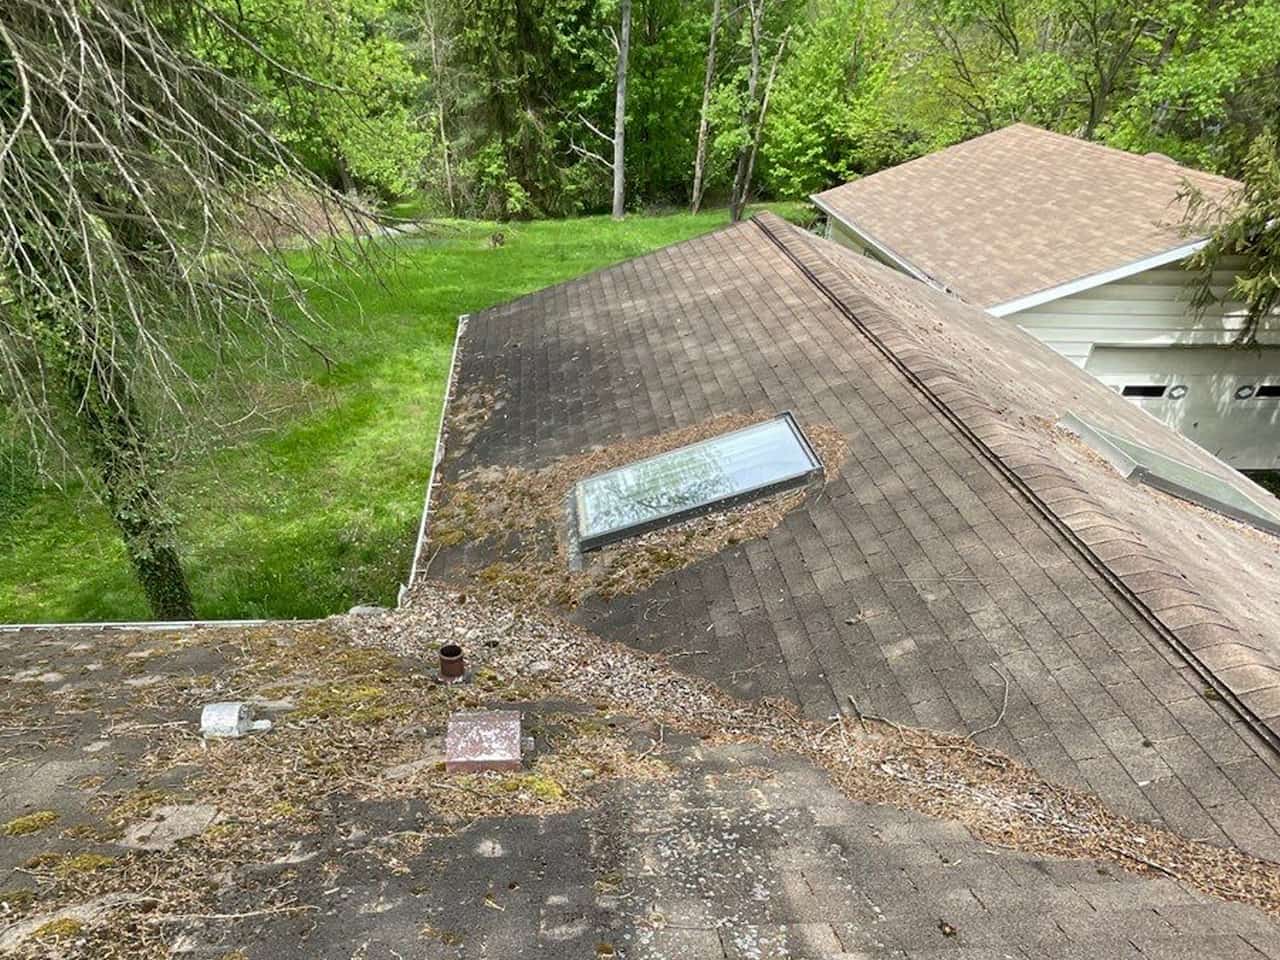 An aerial view of a roof with a skylight captured during work activities.